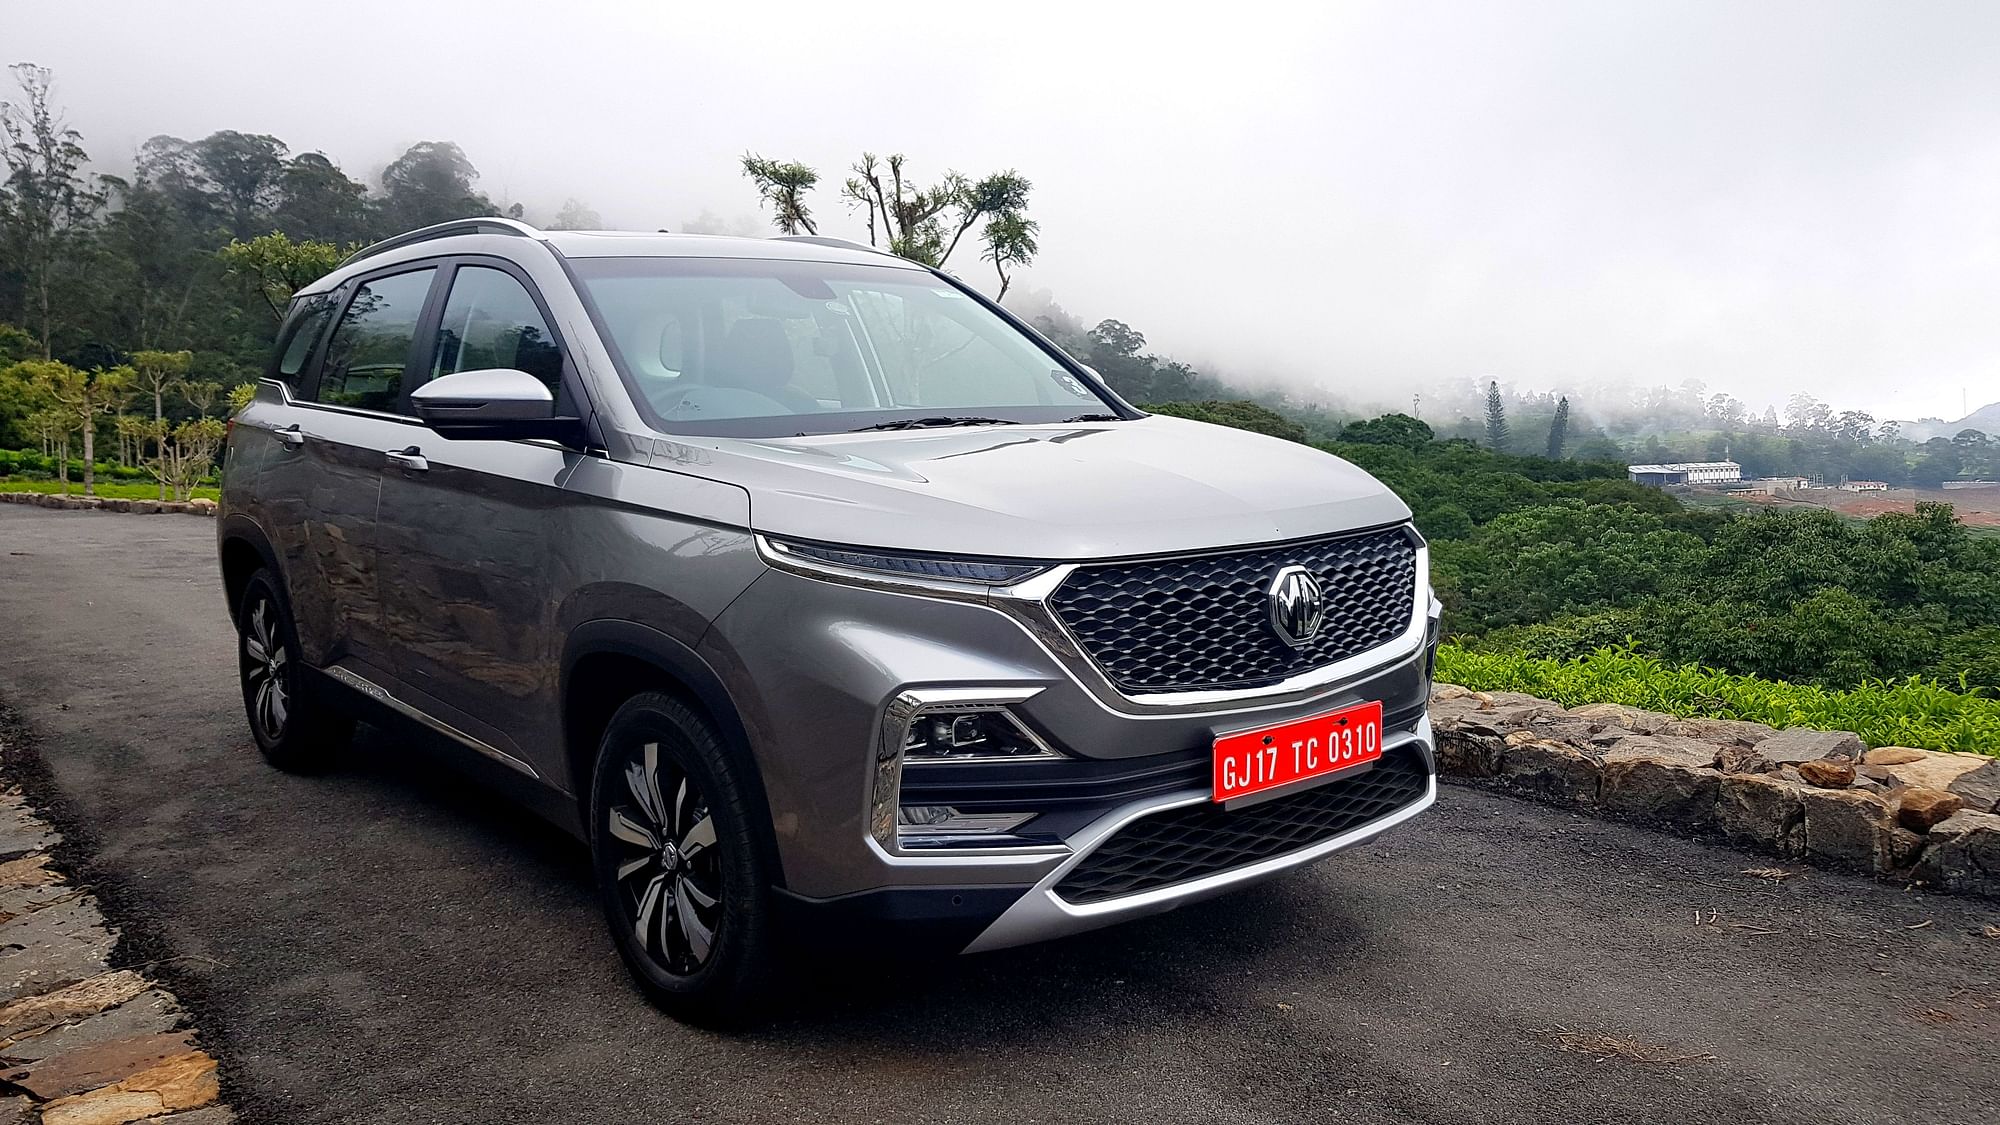 The MG Hector was one of the new SUVs launched in 2019.&nbsp;